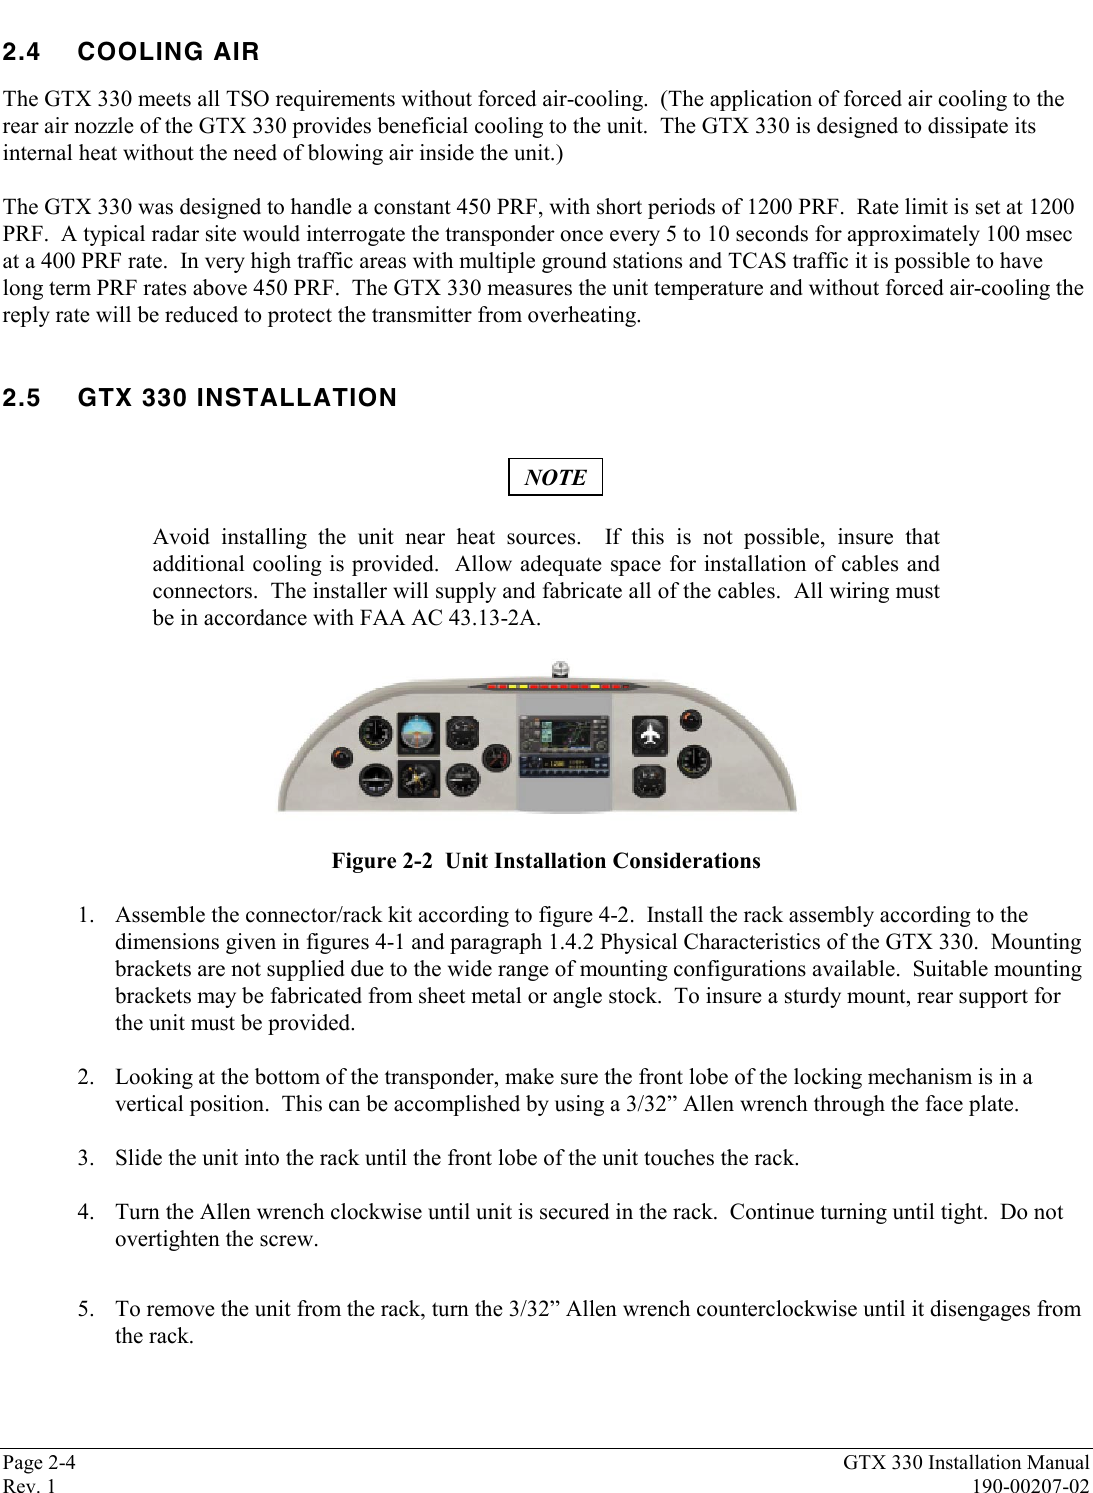 Page 2-4 GTX 330 Installation ManualRev. 1 190-00207-022.4 COOLING AIRThe GTX 330 meets all TSO requirements without forced air-cooling.  (The application of forced air cooling to therear air nozzle of the GTX 330 provides beneficial cooling to the unit.  The GTX 330 is designed to dissipate itsinternal heat without the need of blowing air inside the unit.)The GTX 330 was designed to handle a constant 450 PRF, with short periods of 1200 PRF.  Rate limit is set at 1200PRF.  A typical radar site would interrogate the transponder once every 5 to 10 seconds for approximately 100 msecat a 400 PRF rate.  In very high traffic areas with multiple ground stations and TCAS traffic it is possible to havelong term PRF rates above 450 PRF.  The GTX 330 measures the unit temperature and without forced air-cooling thereply rate will be reduced to protect the transmitter from overheating.2.5 GTX 330 INSTALLATIONNOTEAvoid installing the unit near heat sources.  If this is not possible, insure thatadditional cooling is provided.  Allow adequate space for installation of cables andconnectors.  The installer will supply and fabricate all of the cables.  All wiring mustbe in accordance with FAA AC 43.13-2A.Figure 2-2  Unit Installation Considerations1. Assemble the connector/rack kit according to figure 4-2.  Install the rack assembly according to thedimensions given in figures 4-1 and paragraph 1.4.2 Physical Characteristics of the GTX 330.  Mountingbrackets are not supplied due to the wide range of mounting configurations available.  Suitable mountingbrackets may be fabricated from sheet metal or angle stock.  To insure a sturdy mount, rear support forthe unit must be provided.2. Looking at the bottom of the transponder, make sure the front lobe of the locking mechanism is in avertical position.  This can be accomplished by using a 3/32” Allen wrench through the face plate.3. Slide the unit into the rack until the front lobe of the unit touches the rack.4. Turn the Allen wrench clockwise until unit is secured in the rack.  Continue turning until tight.  Do notovertighten the screw.5. To remove the unit from the rack, turn the 3/32” Allen wrench counterclockwise until it disengages fromthe rack.